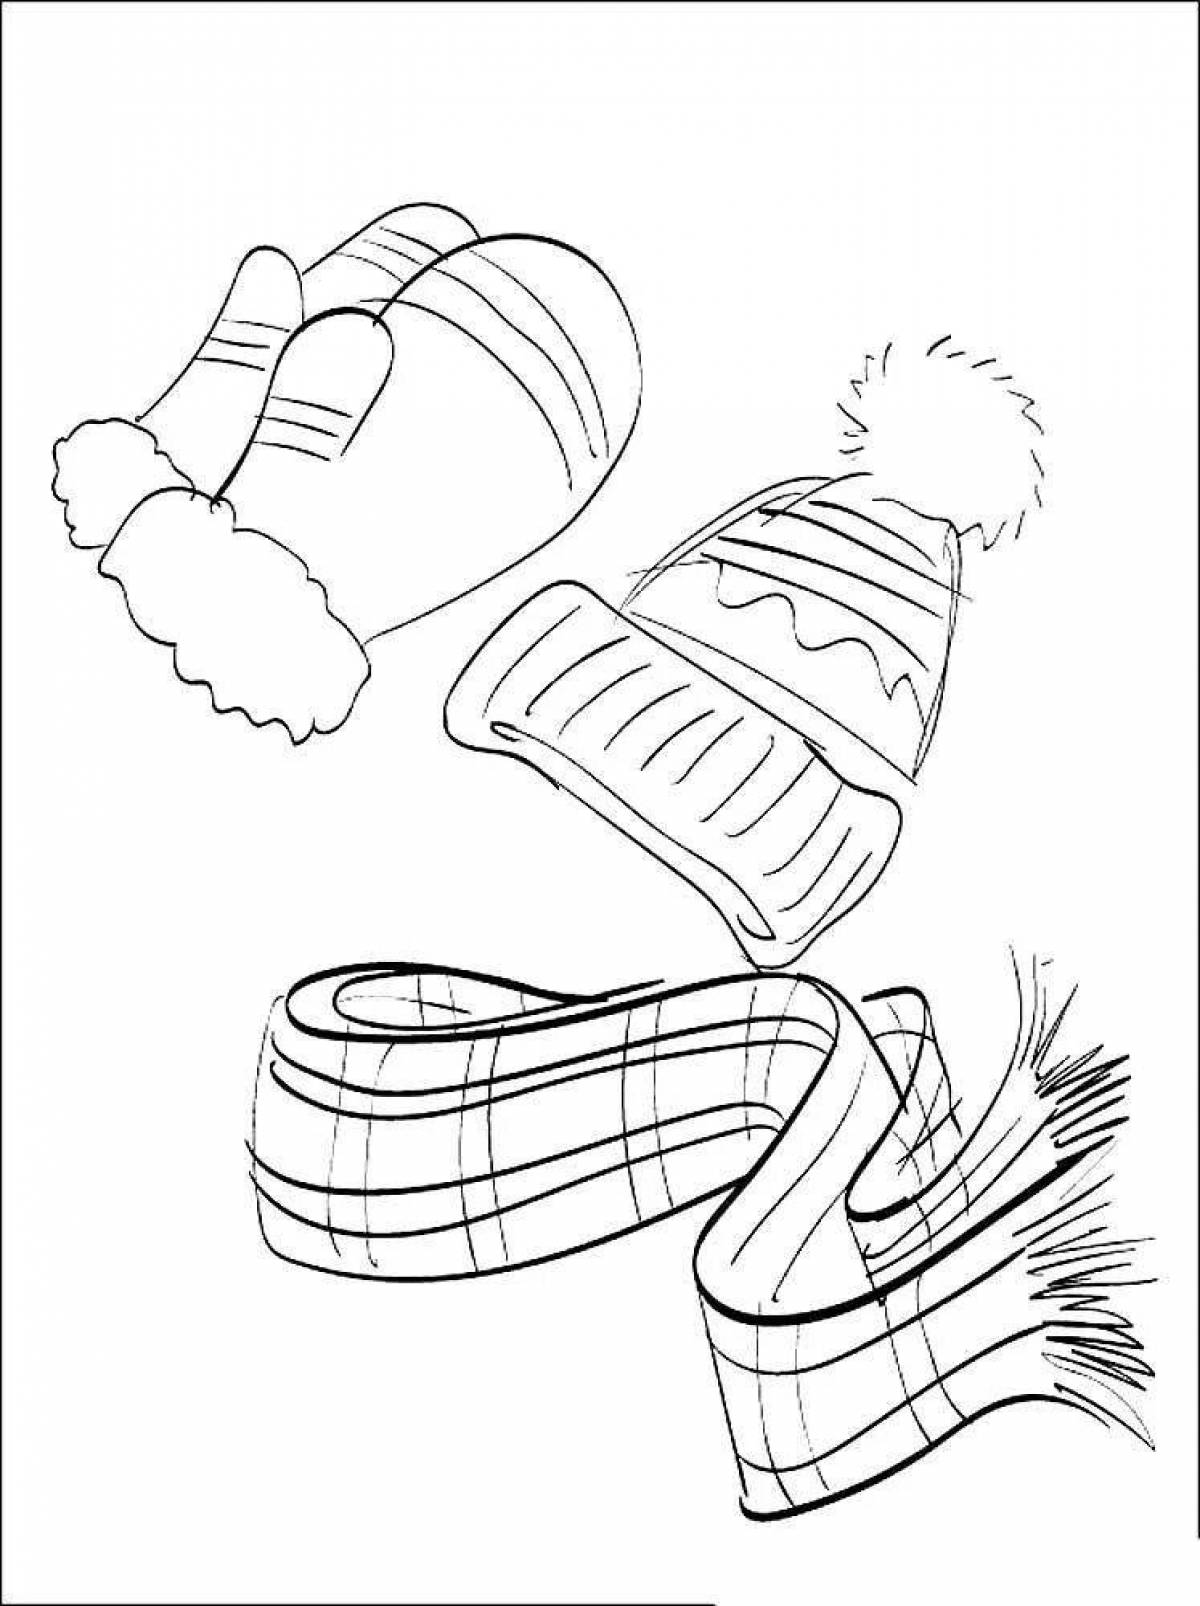 Coloring page of dazzling hat and scarf for wee ones